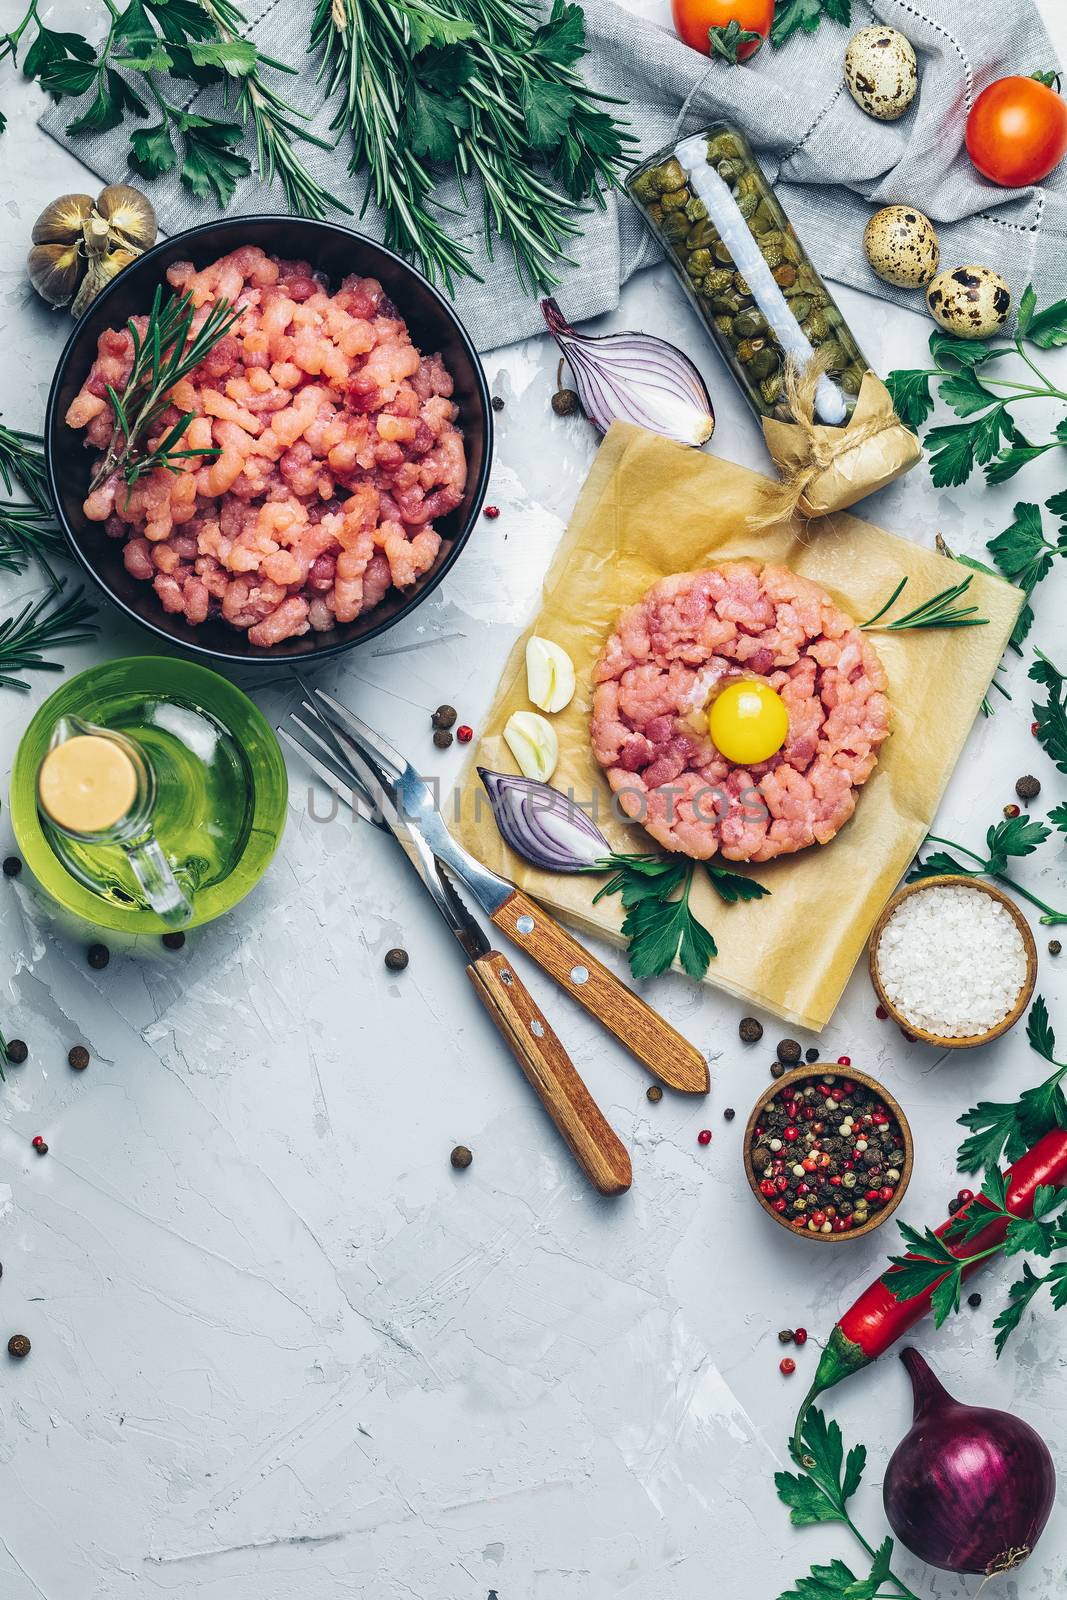 Healthy food, cooking concept. Homemade raw organic minced beef meat and steak tartare with yolk with vegetables on light gray stone concrete textured surface background. Copy space background, top view flat lay.